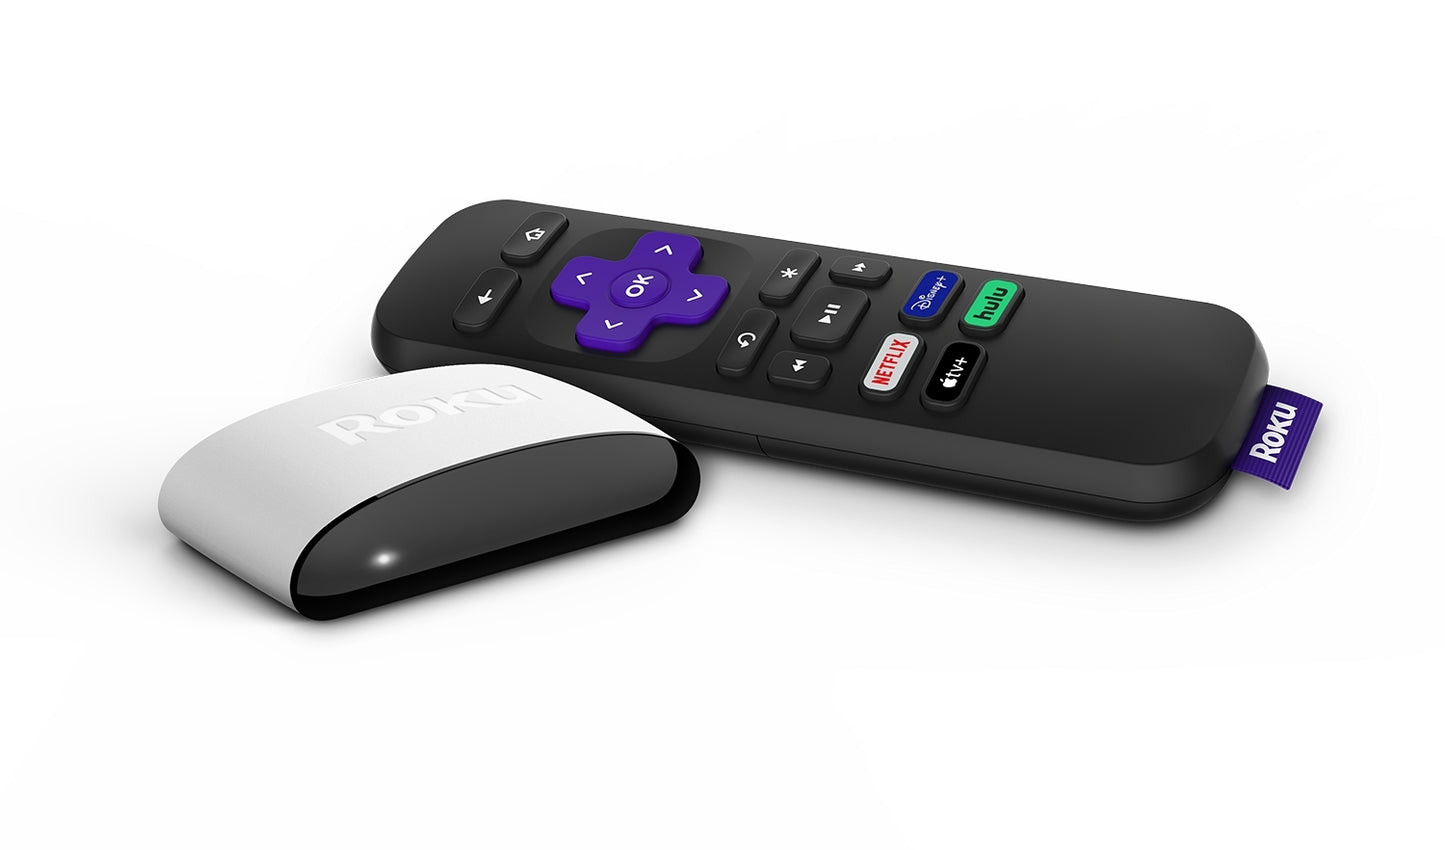 Roku LE 2021 Limited Edition 1080p Full HD Streaming Media Player with High Speed HDMI Cable and Remote